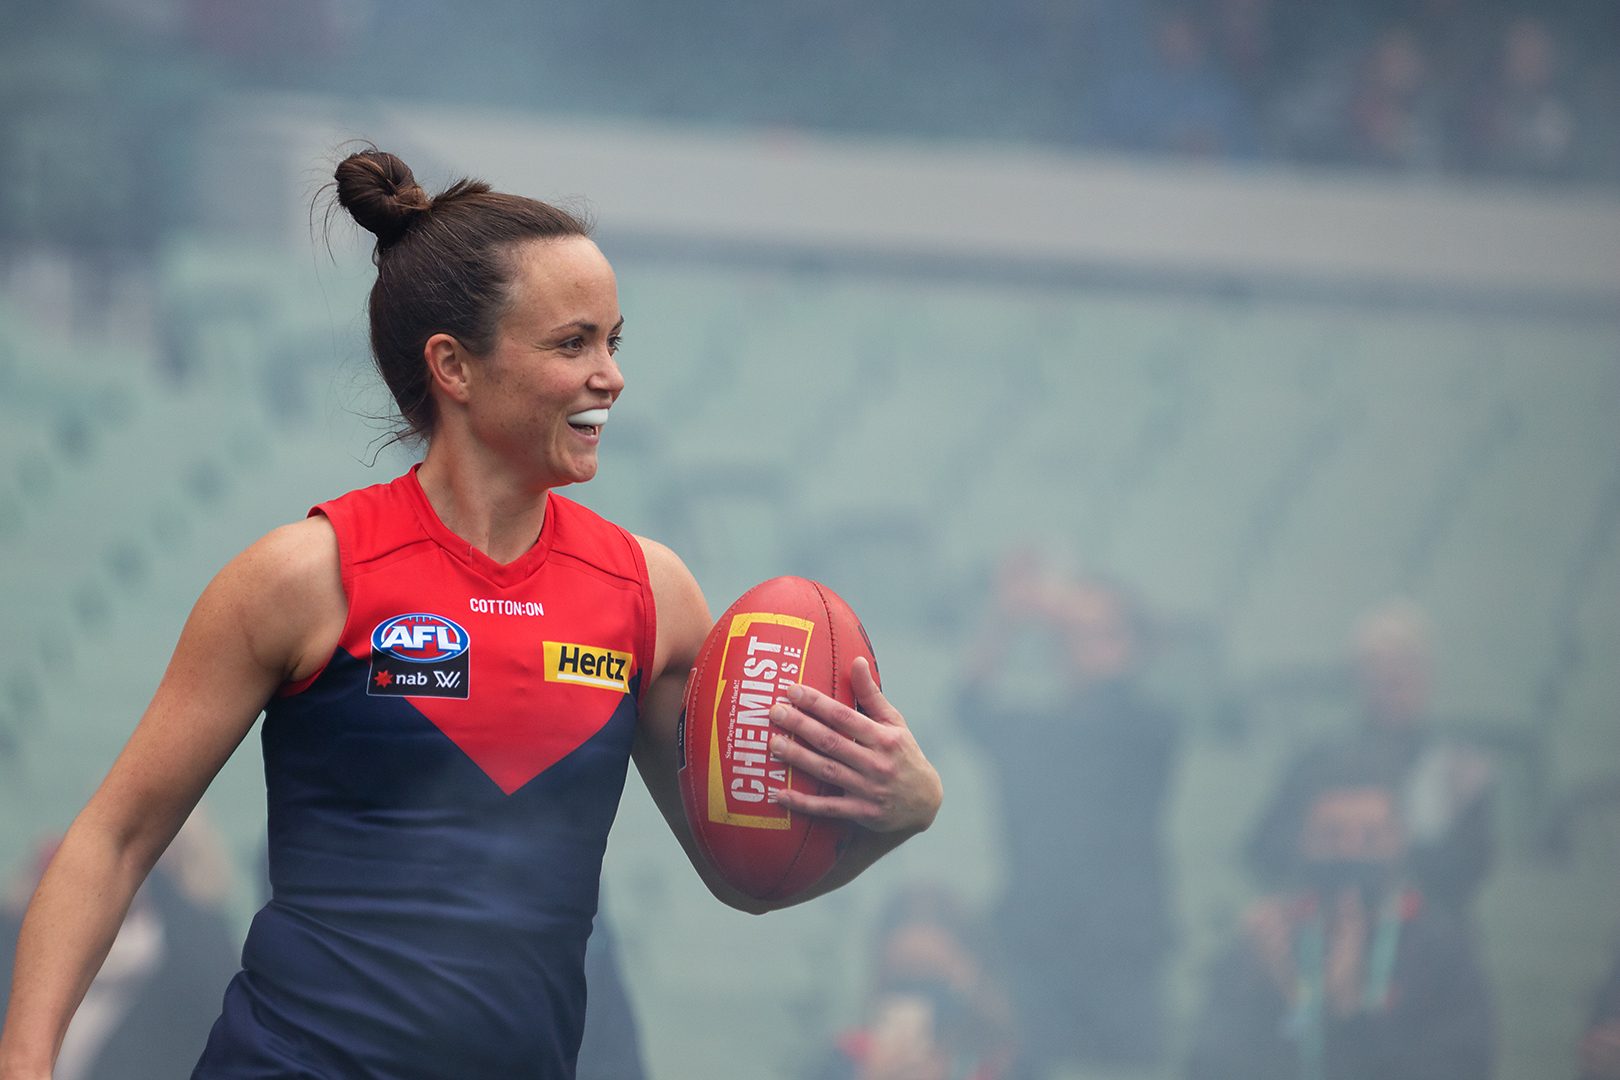 A close up photograph of Melbourne Demons AFLW captain Daisy Pearce standing in a stadium and holding a football in her left arm. She is smiling and wearing a Demons guernsey and her mouthguard. The background is hazy with some spectators visible.